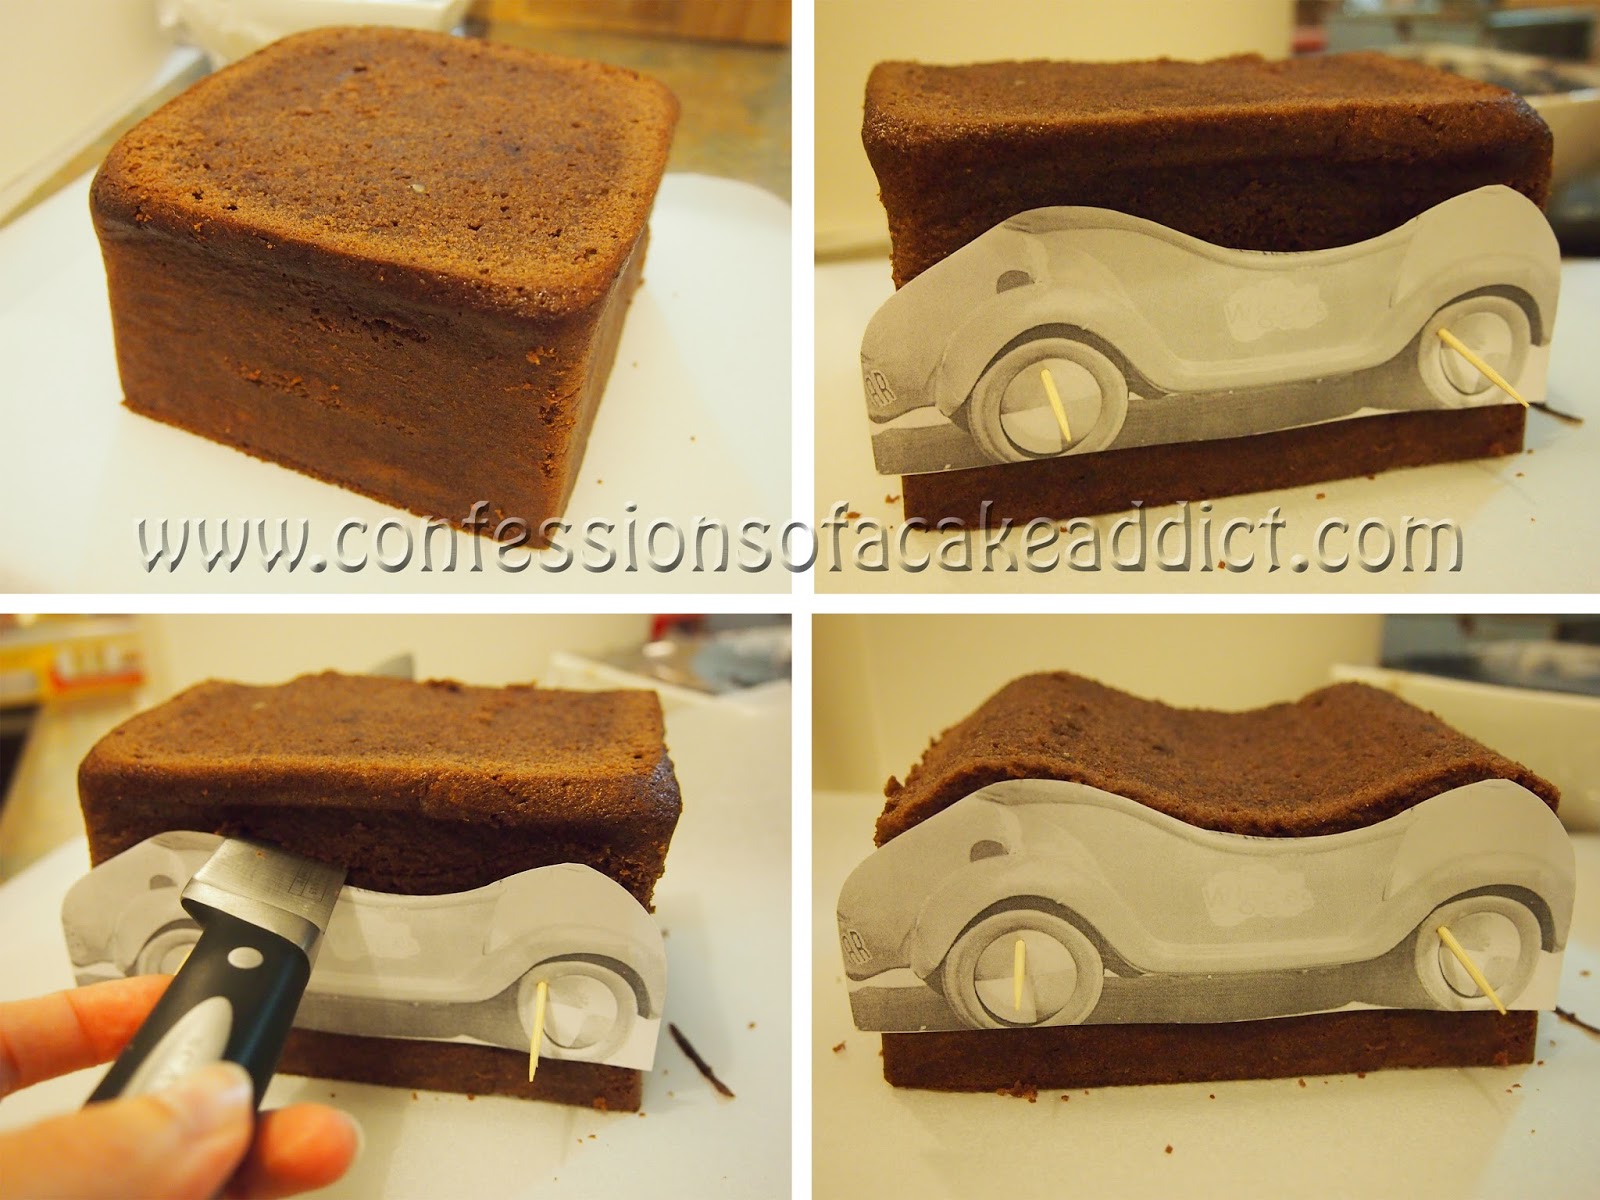 ... of making and decorating the car cake in a bit of detail in this post